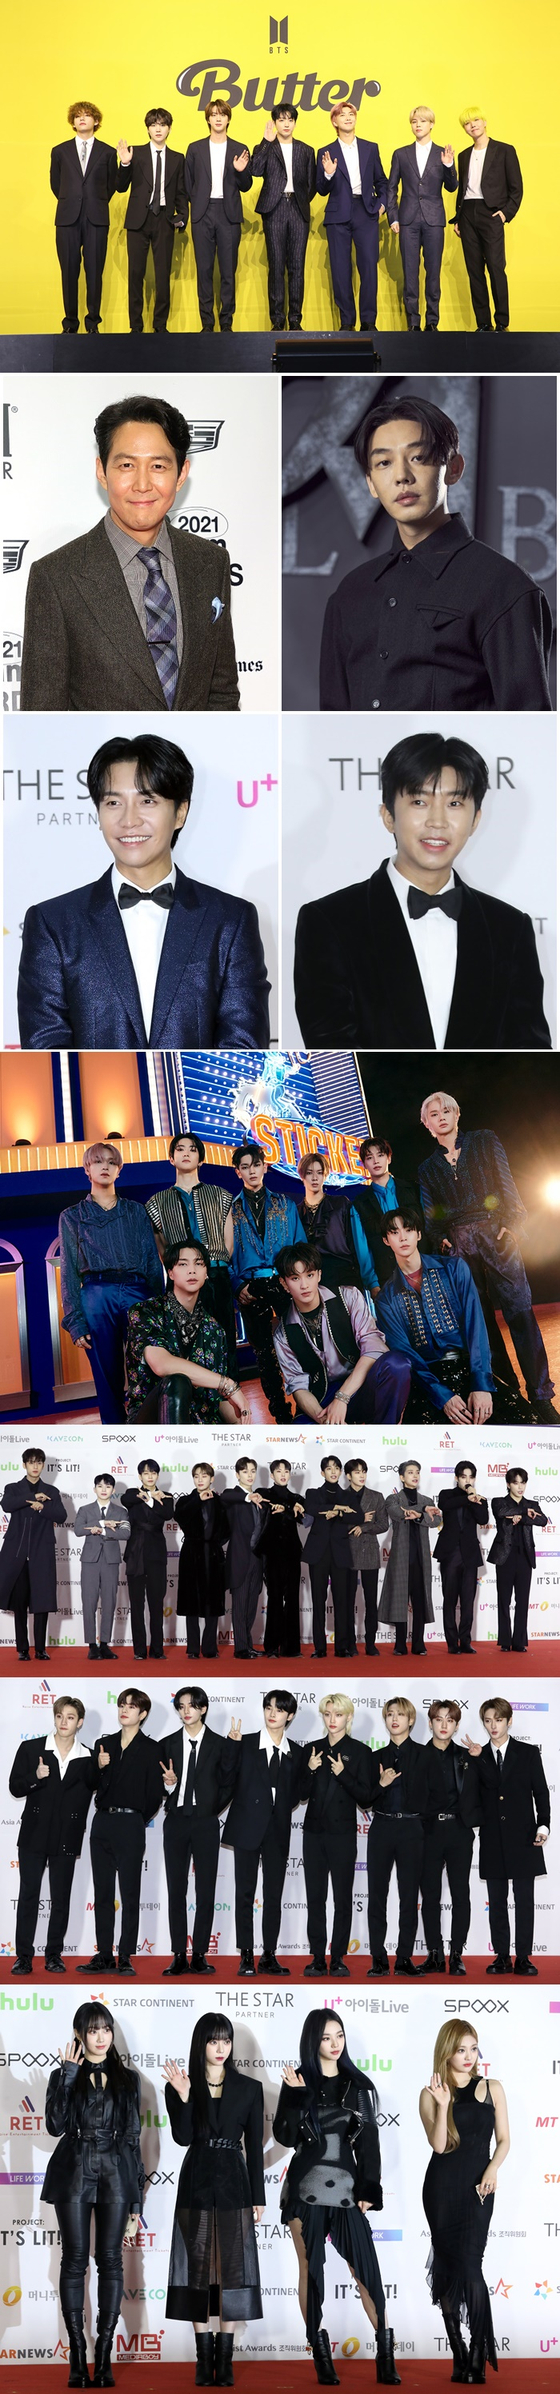 The Grand Prize winners at the 2021 Asia Artist Awards: from top, BTS, Lee Jung-jae, Yoo Ah-in, Lee Seung-gi, Lim Young-woong, NCT 127, Seventeen, Stray Kids and aespa [ILGAN SPORTS]